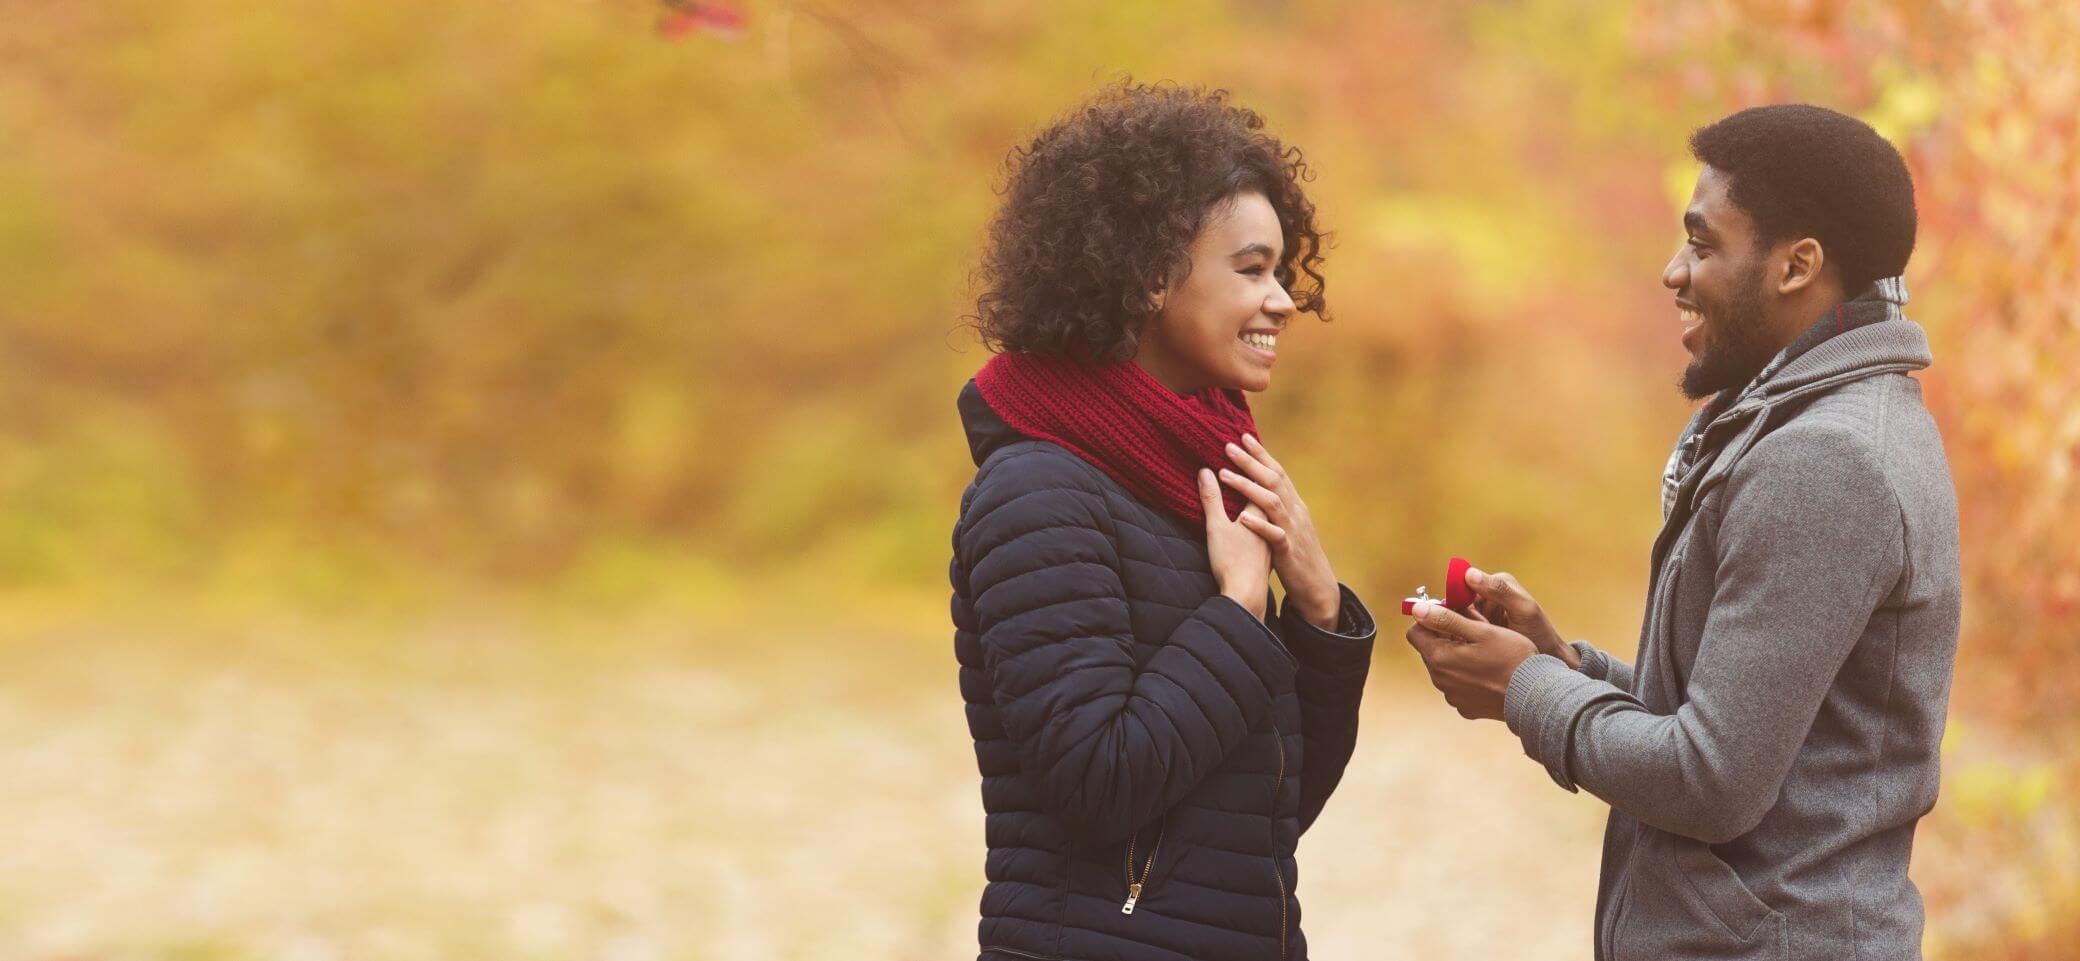 7 Do's (and Some Don'ts) of Marriage Proposals